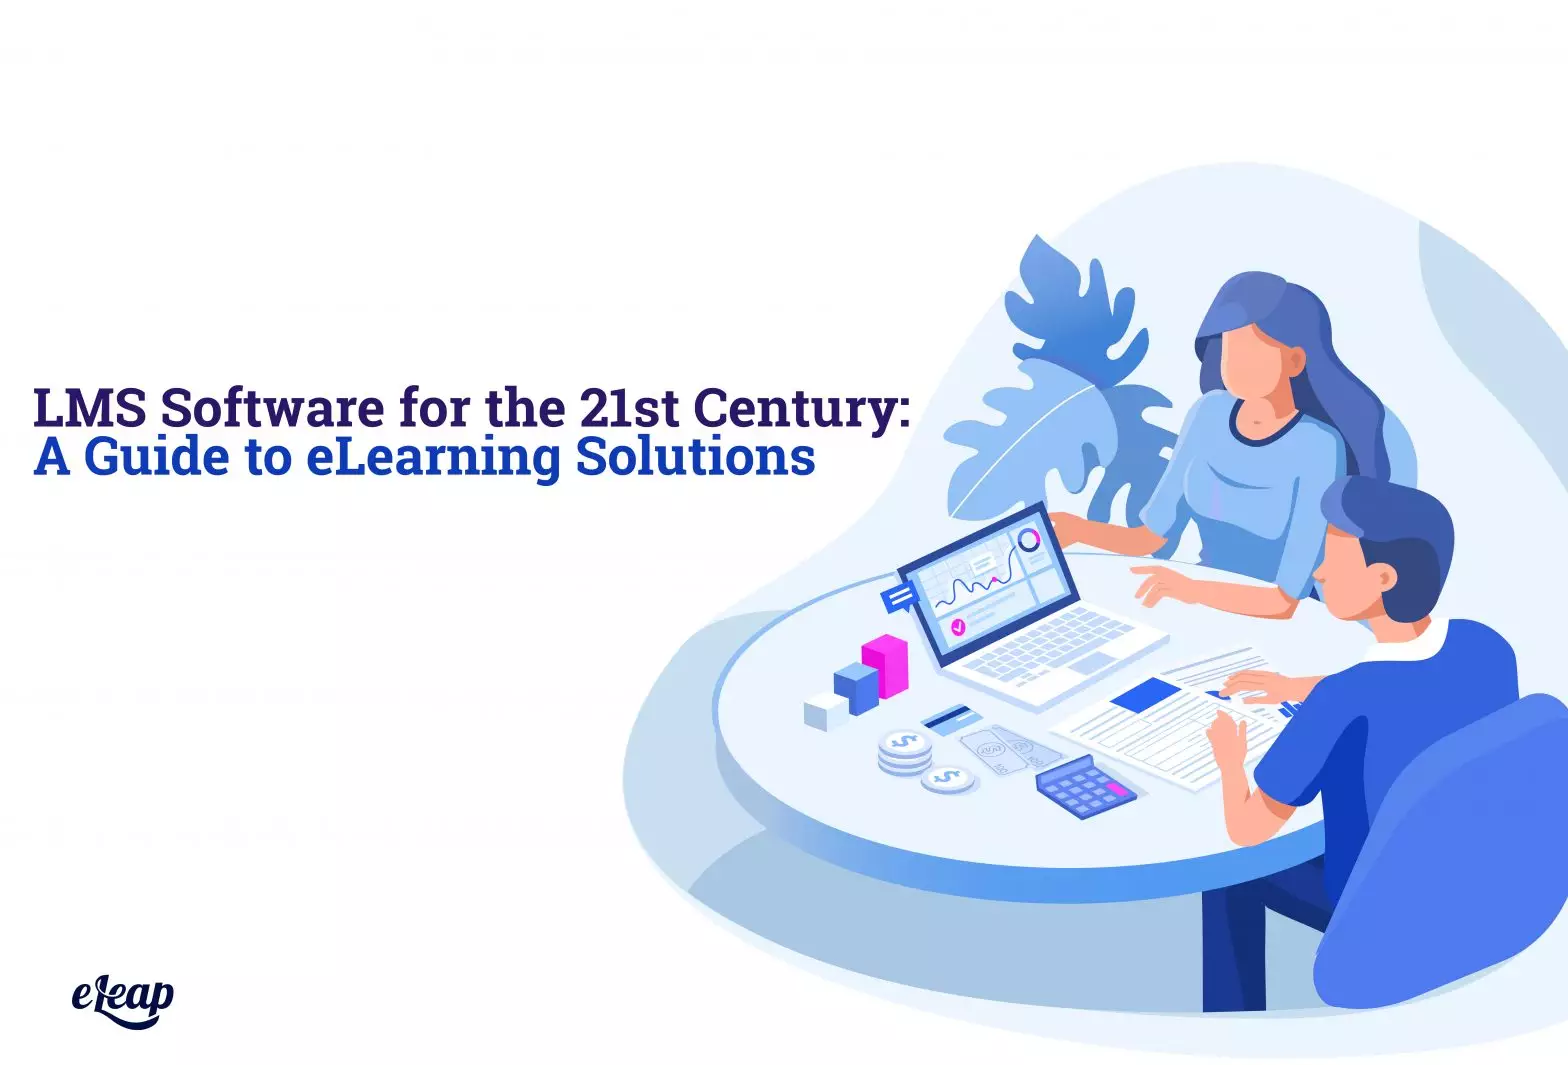 LMS Software for the 21st Century: A Guide to eLearning Solutions